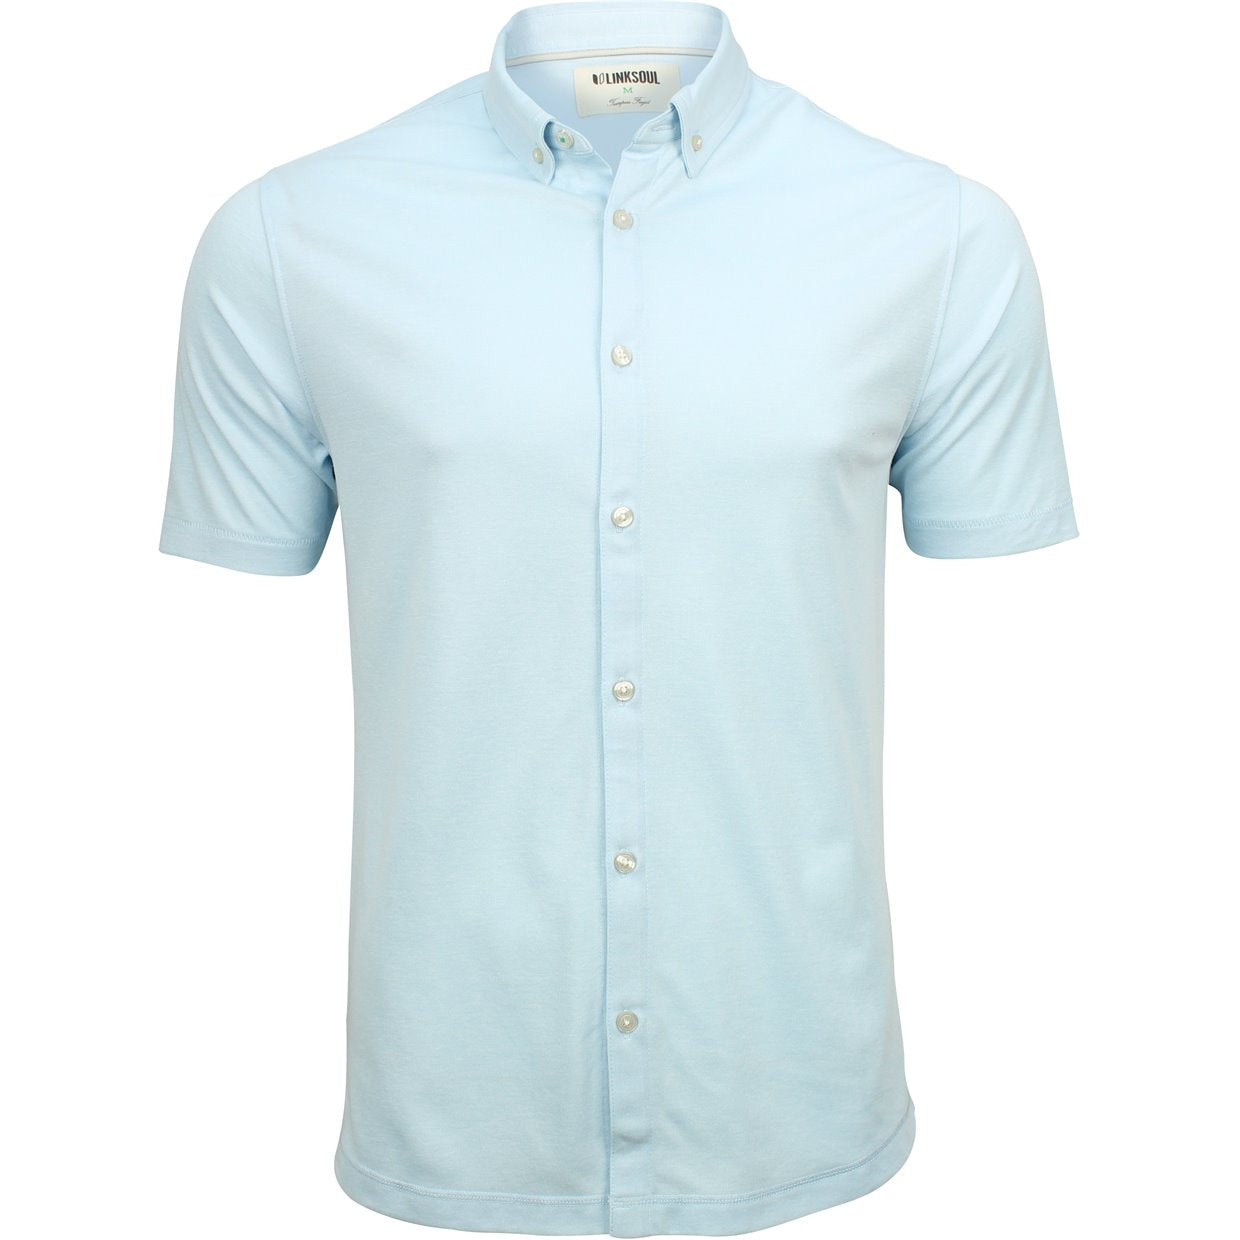 5 Linksoul shirts that are perfect for a round of golf — and dinner ...